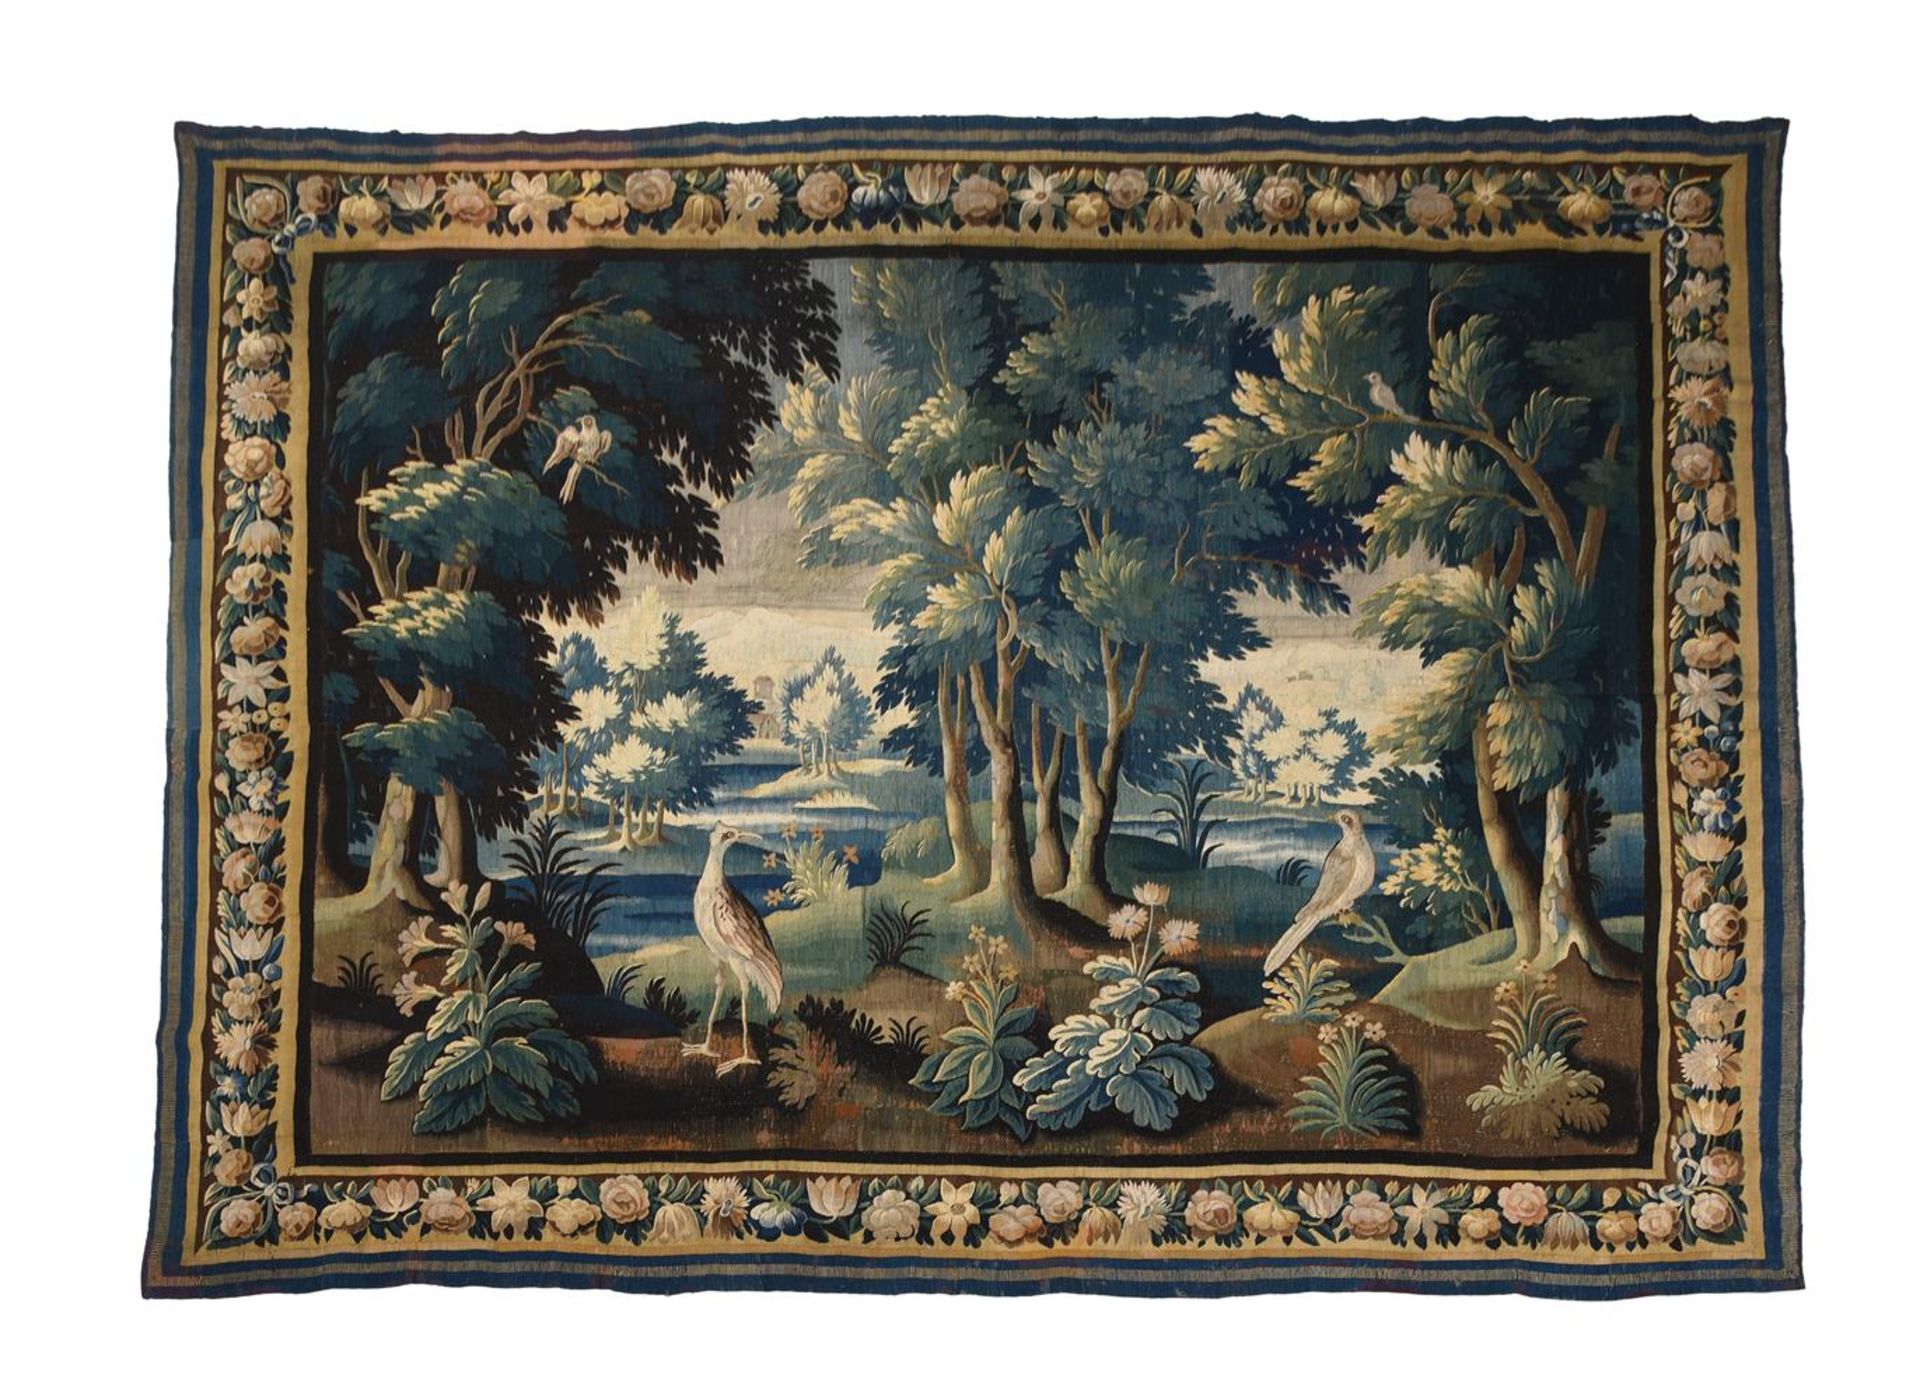 A FLEMISH VERDURE TAPESTRY, LATE 17TH OR EARLY 18TH CENTURY